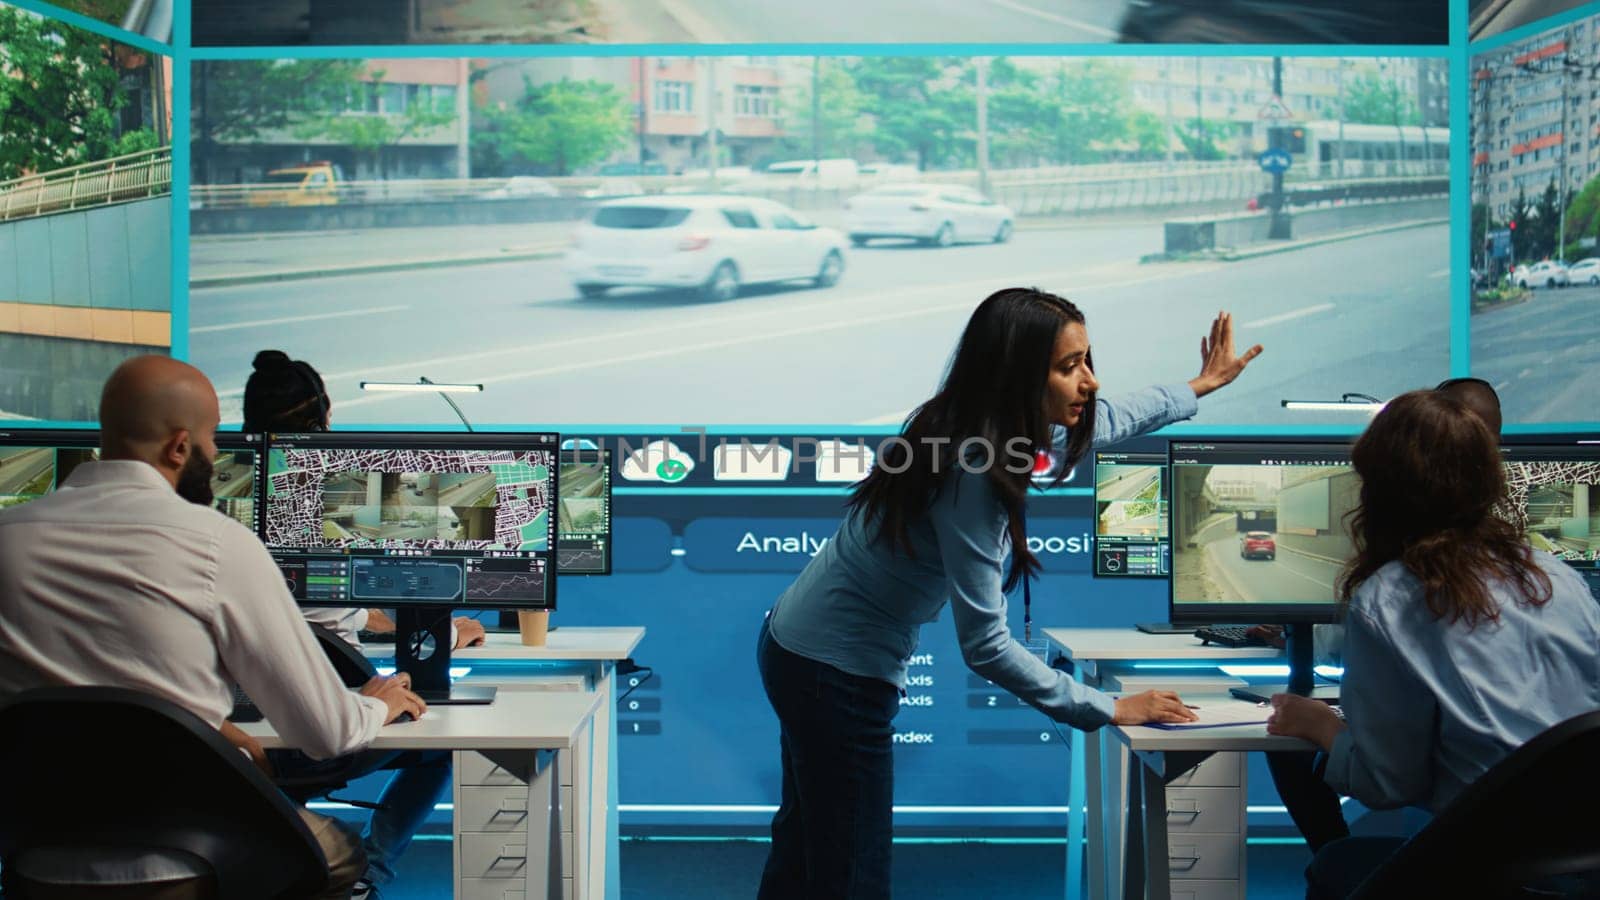 Indian supervisor leads her team to monitor the surveillance video footage and CCTV cameras to learn about urban traffic dynamics. Diverse people working on public safety. Camera B.